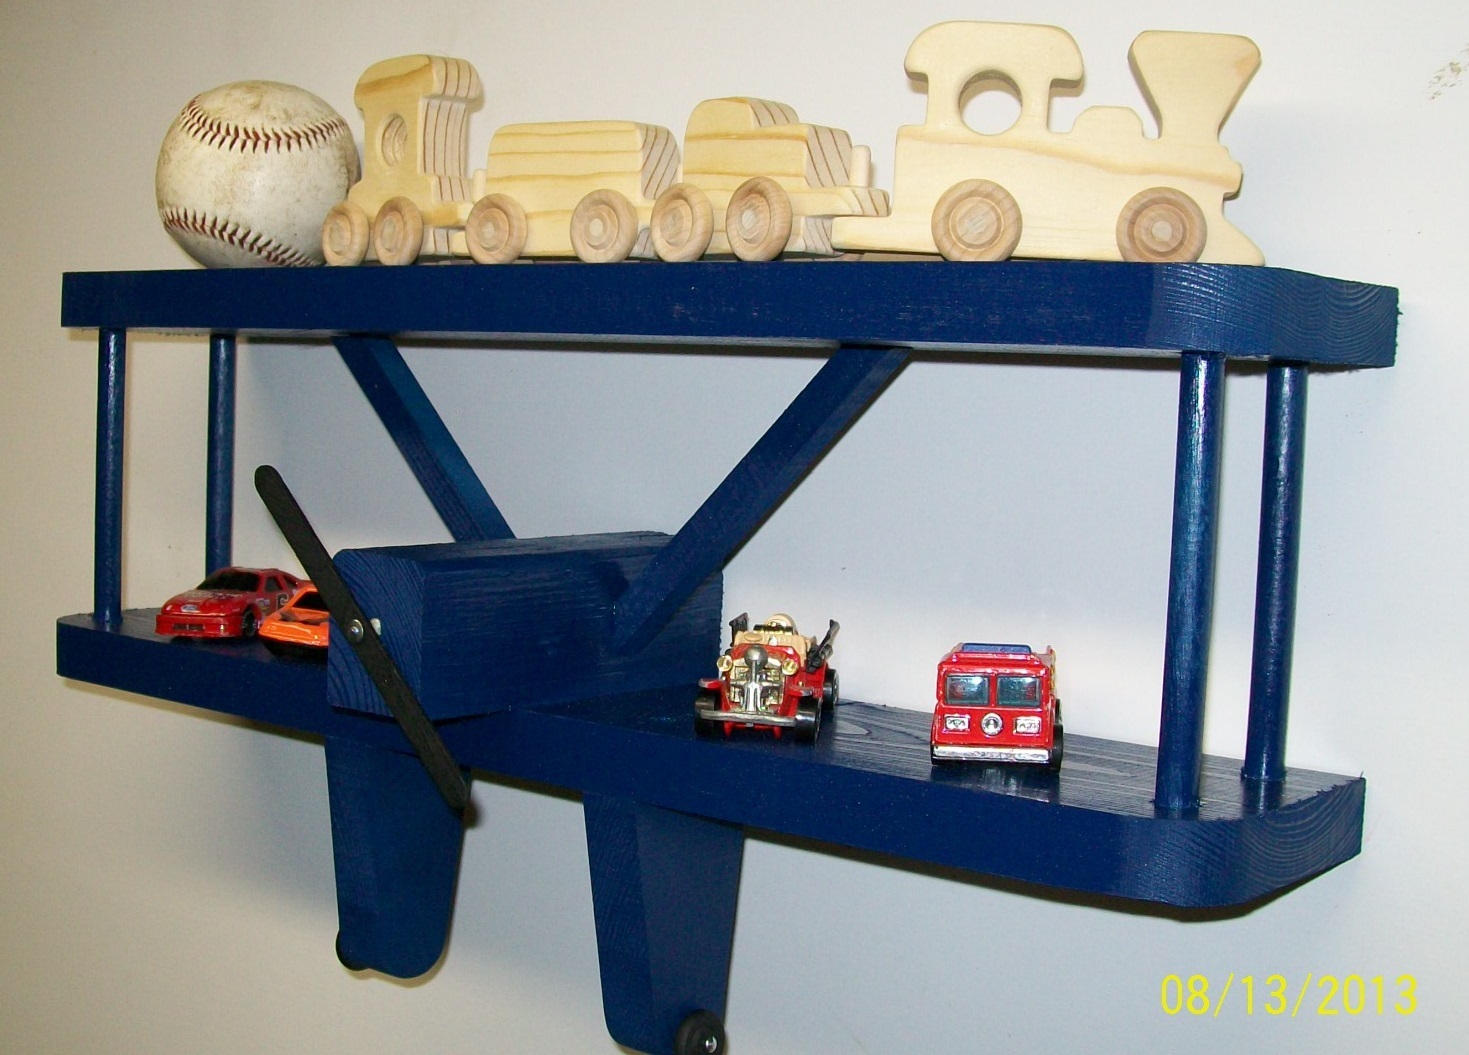 AVIATION / KIDS' ROOM / AIRPLANE COLLECTORS --  BLUE AIRPLANE SHELF - Large 18"  - $60.00